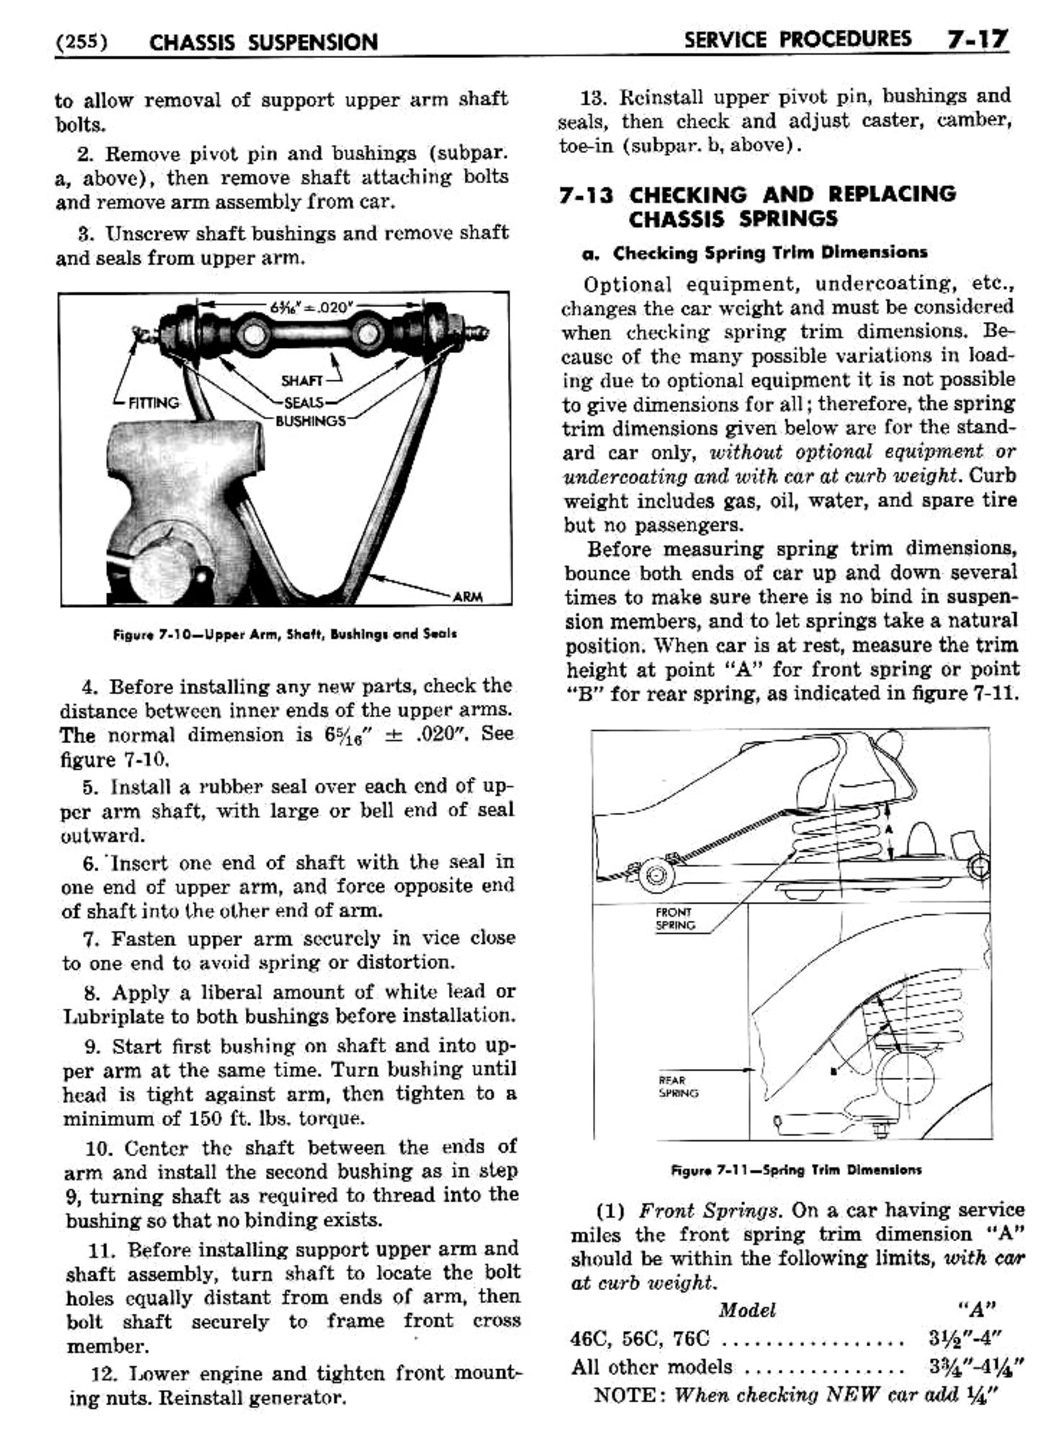 n_08 1956 Buick Shop Manual - Chassis Suspension-017-017.jpg